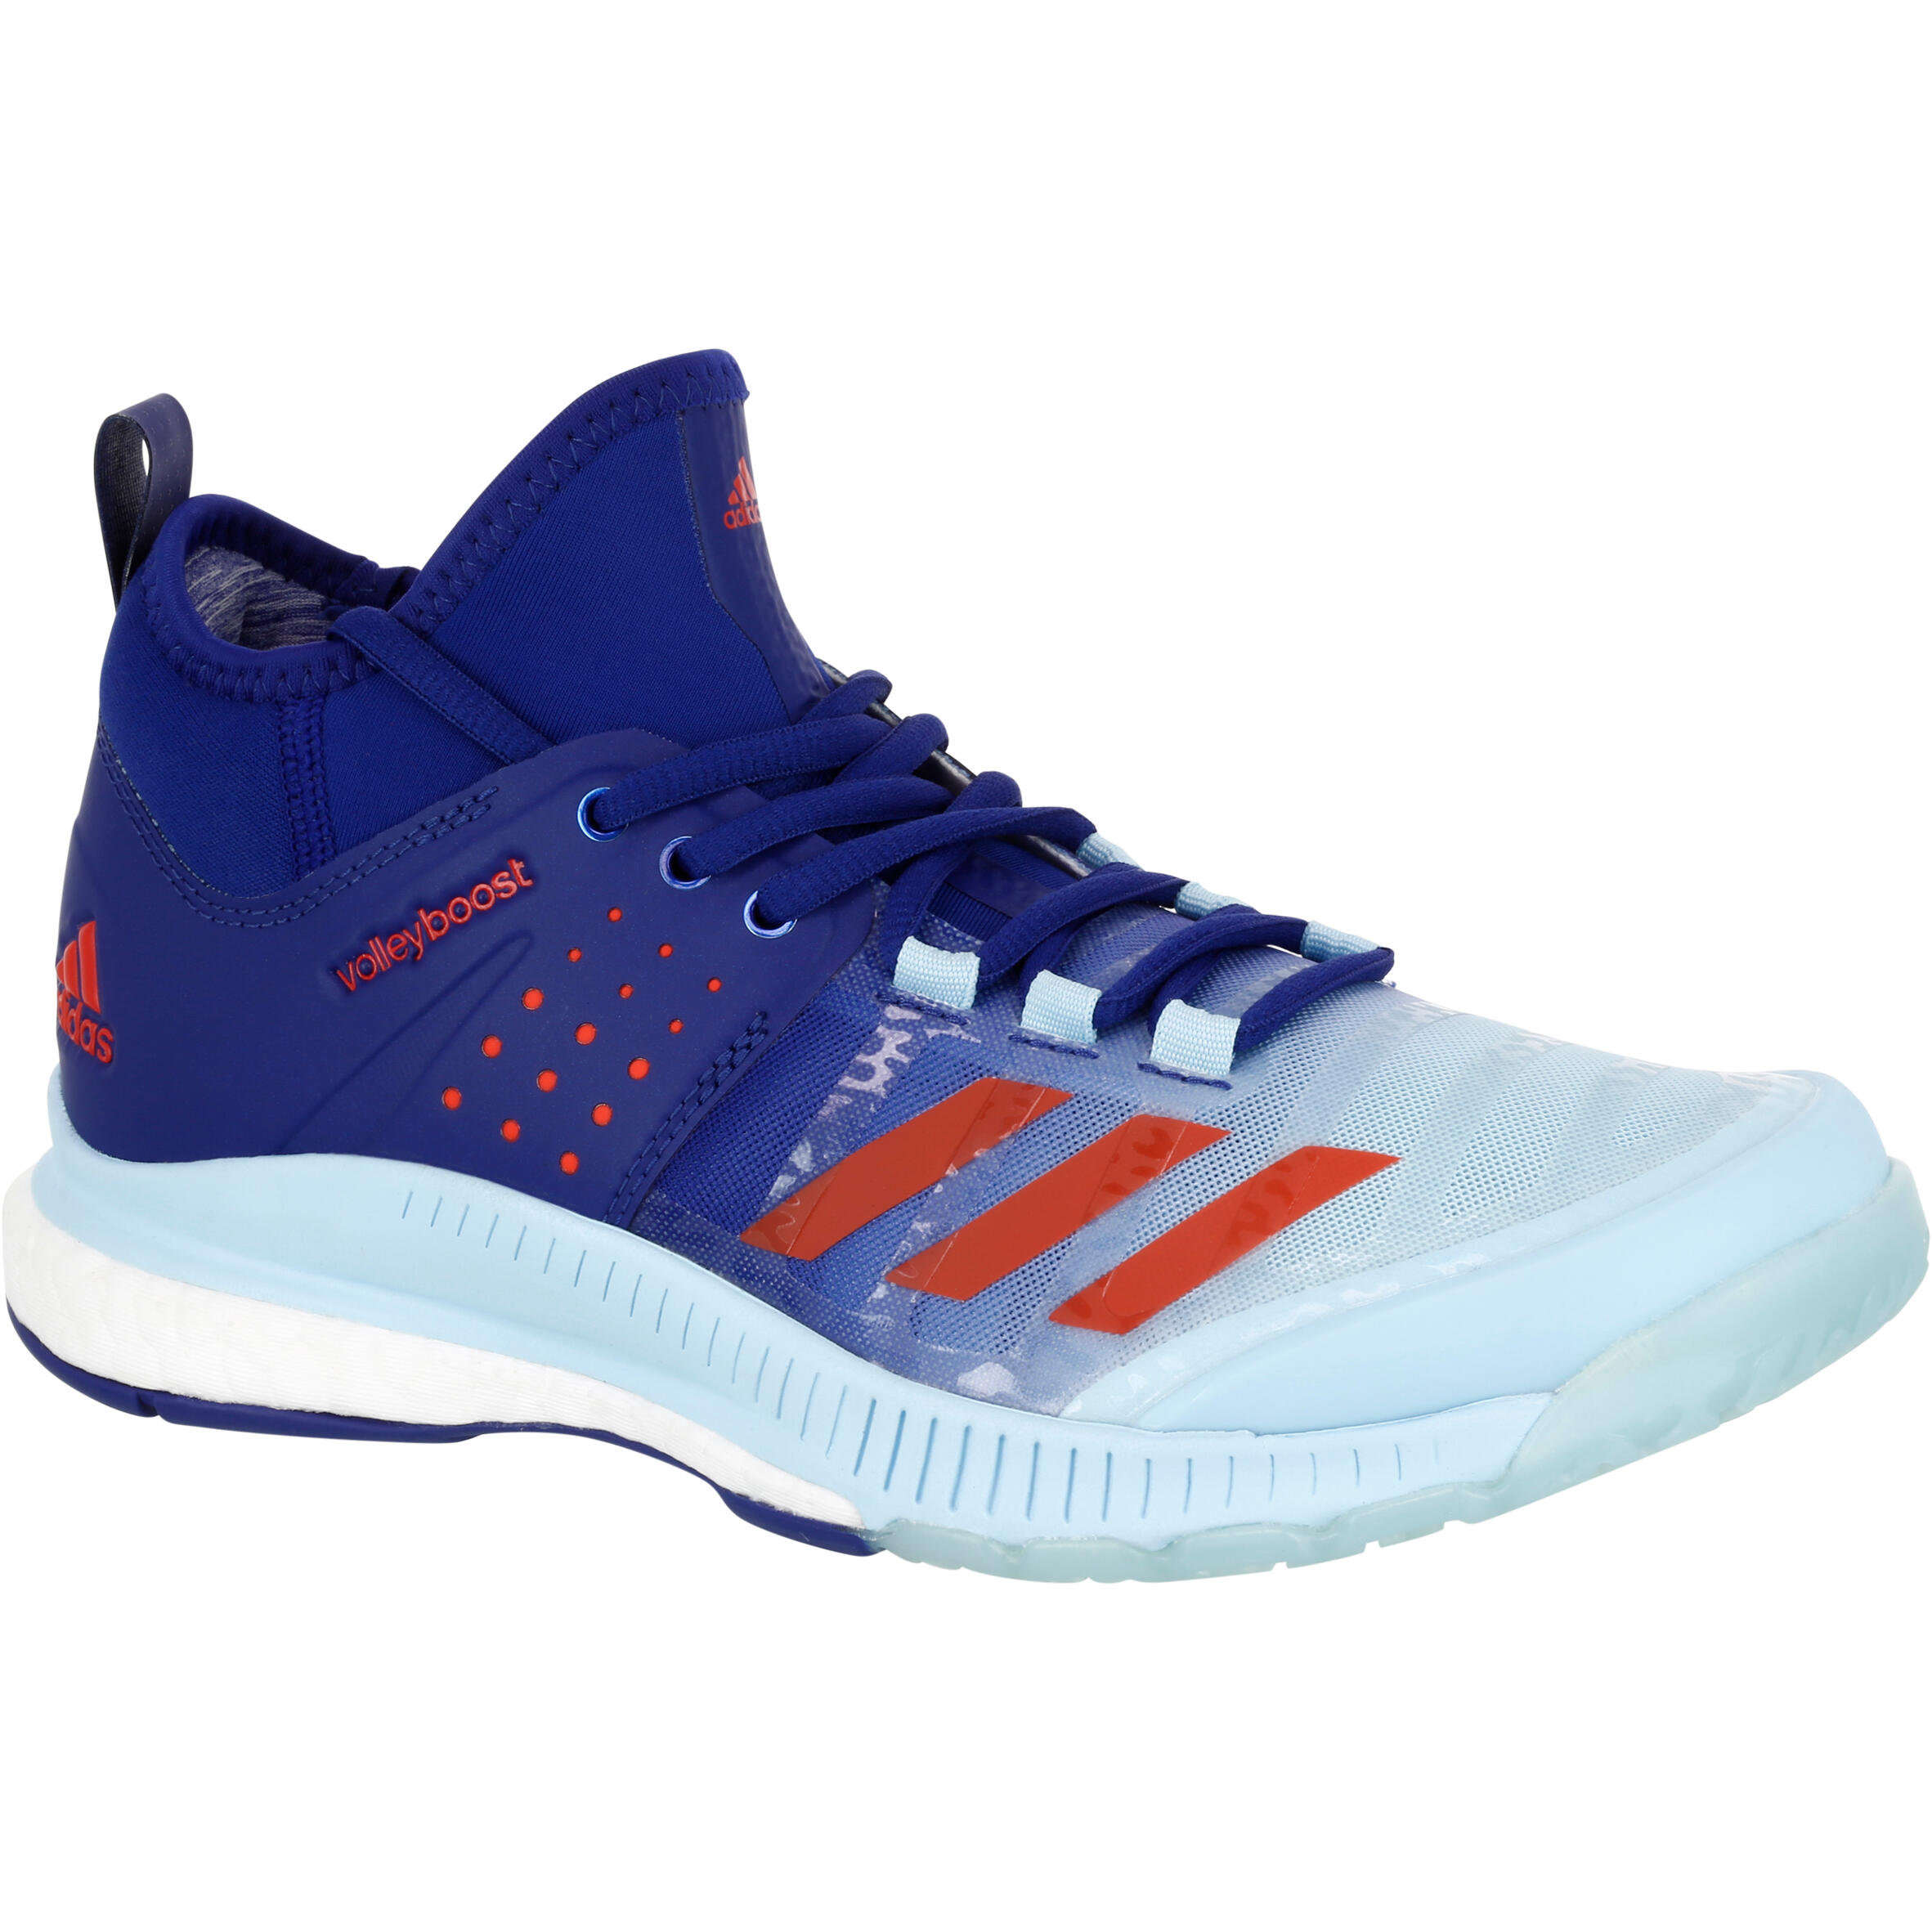 chaussure adidas volley homme